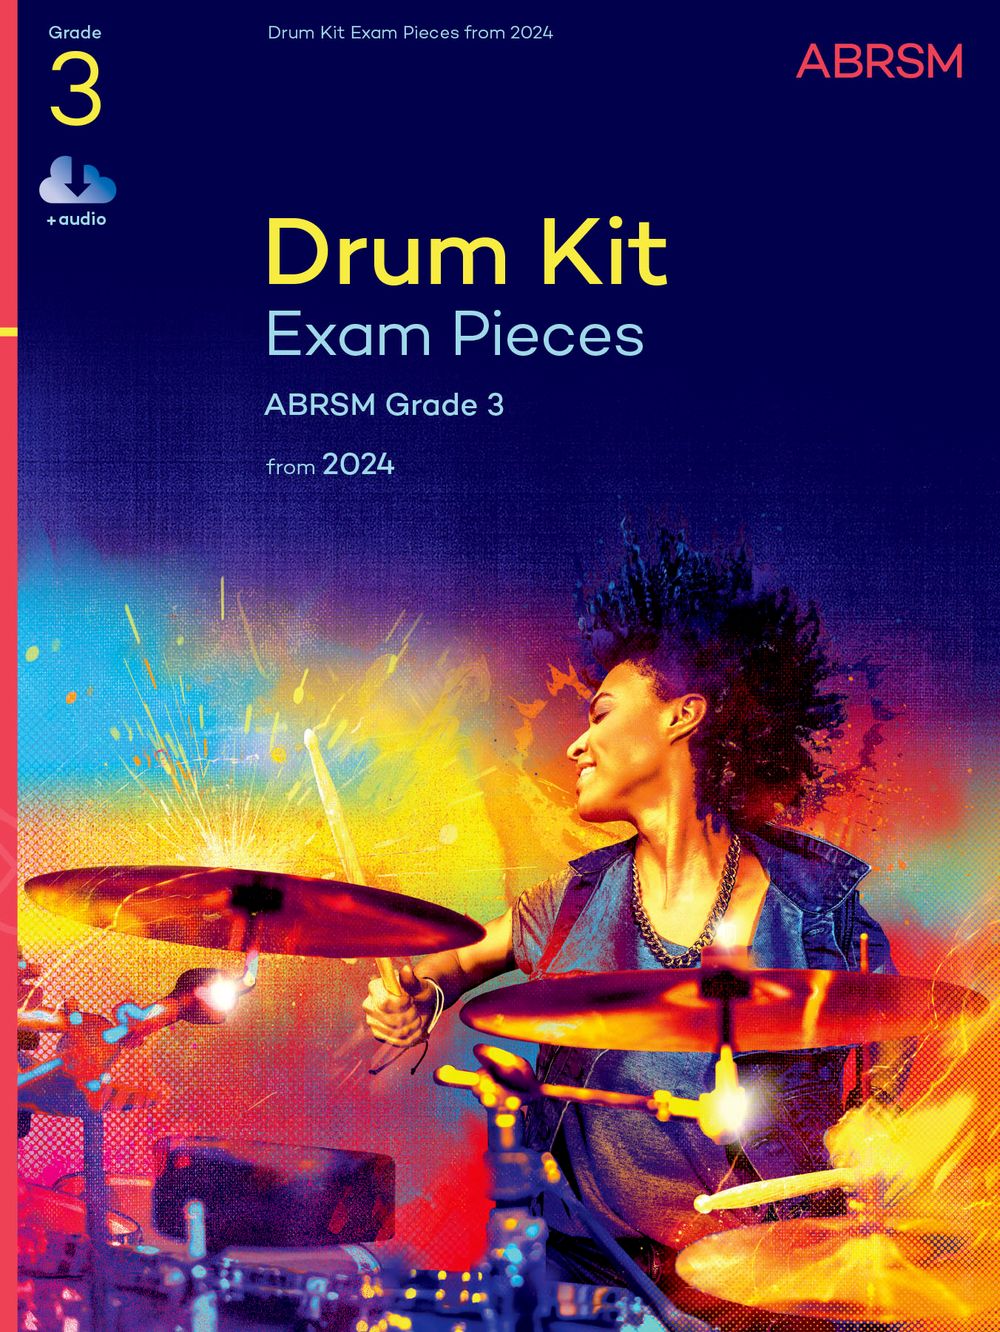 Drum Kit Exam Pieces From 2024 Grade 3 Abrsm Sheet Music Songbook